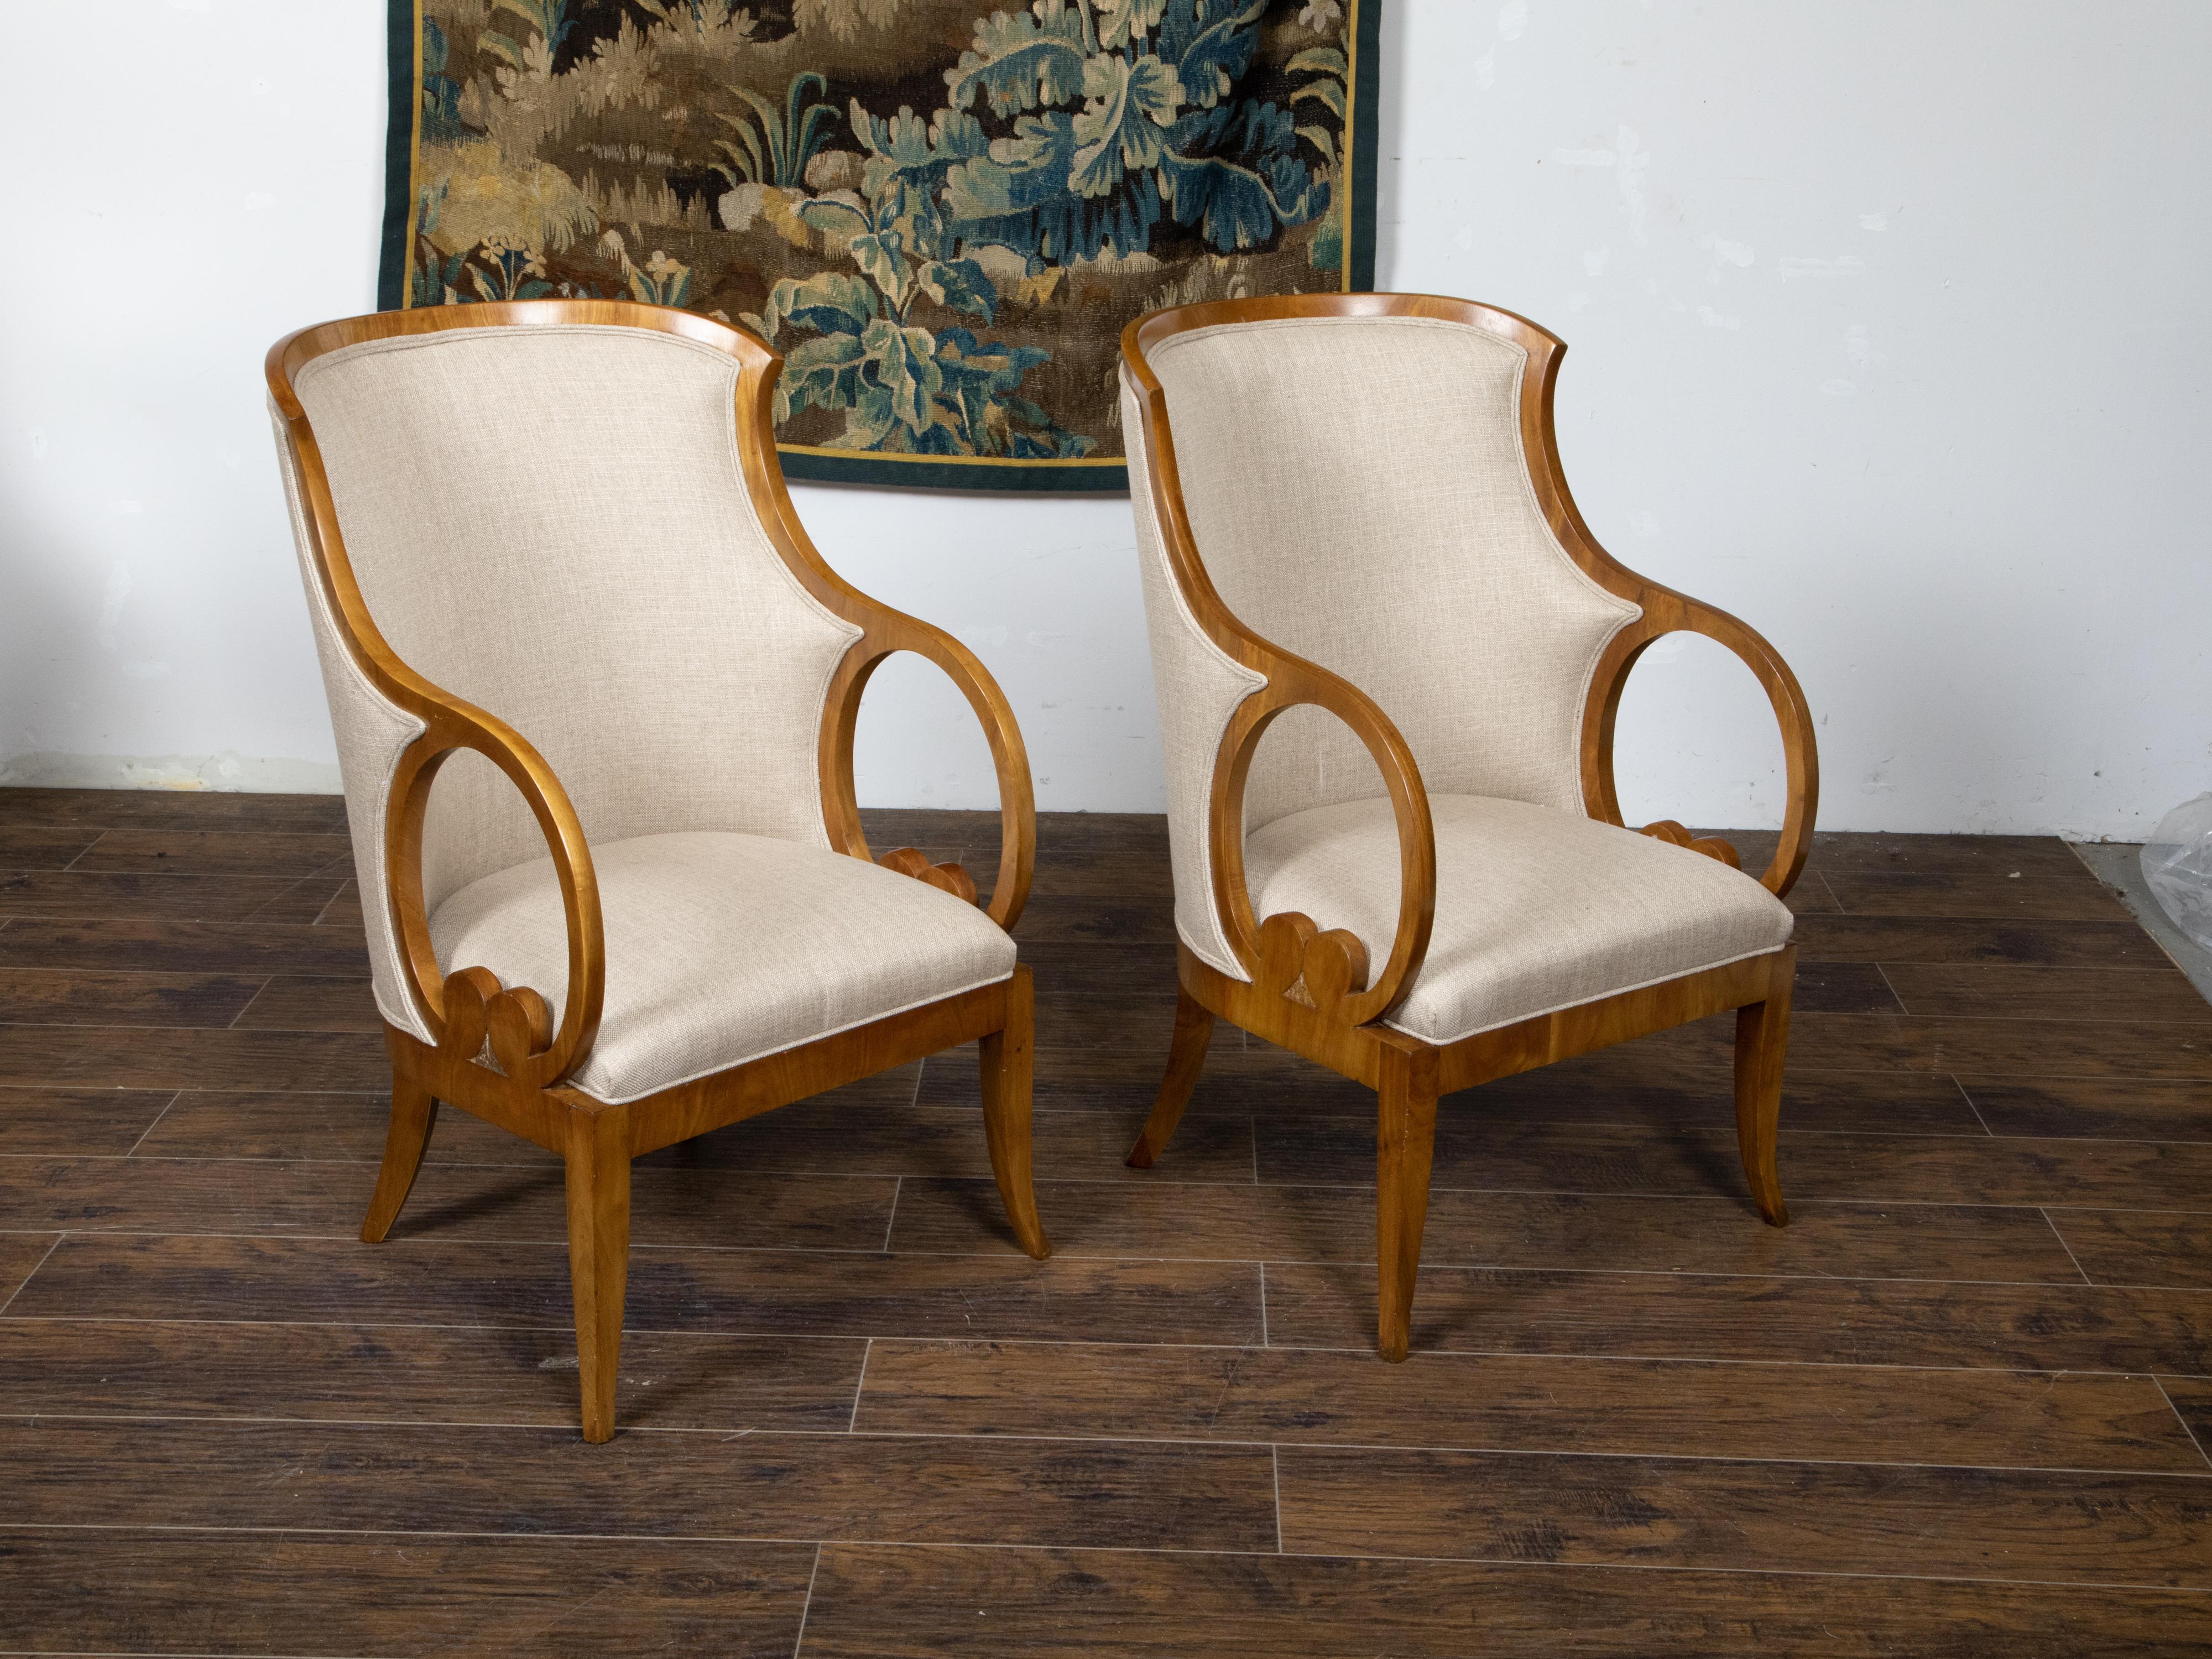 Pair of Austrian Biedermeier Period 19th Century Walnut Armchairs with Loop Arms For Sale 3